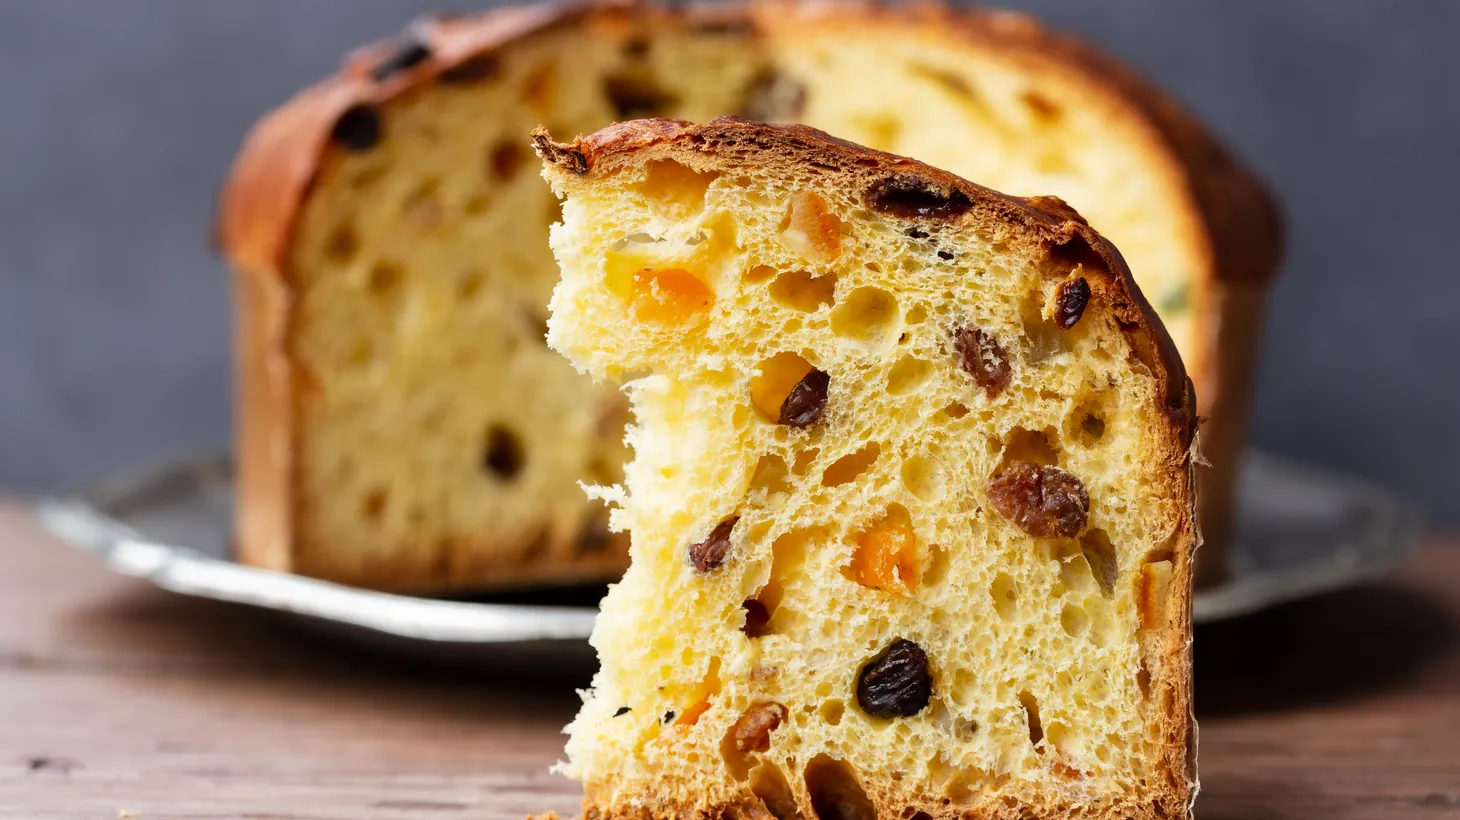 Panettone is a bread so rich it might as well be cake, lightly studded with raisins and orange zest.